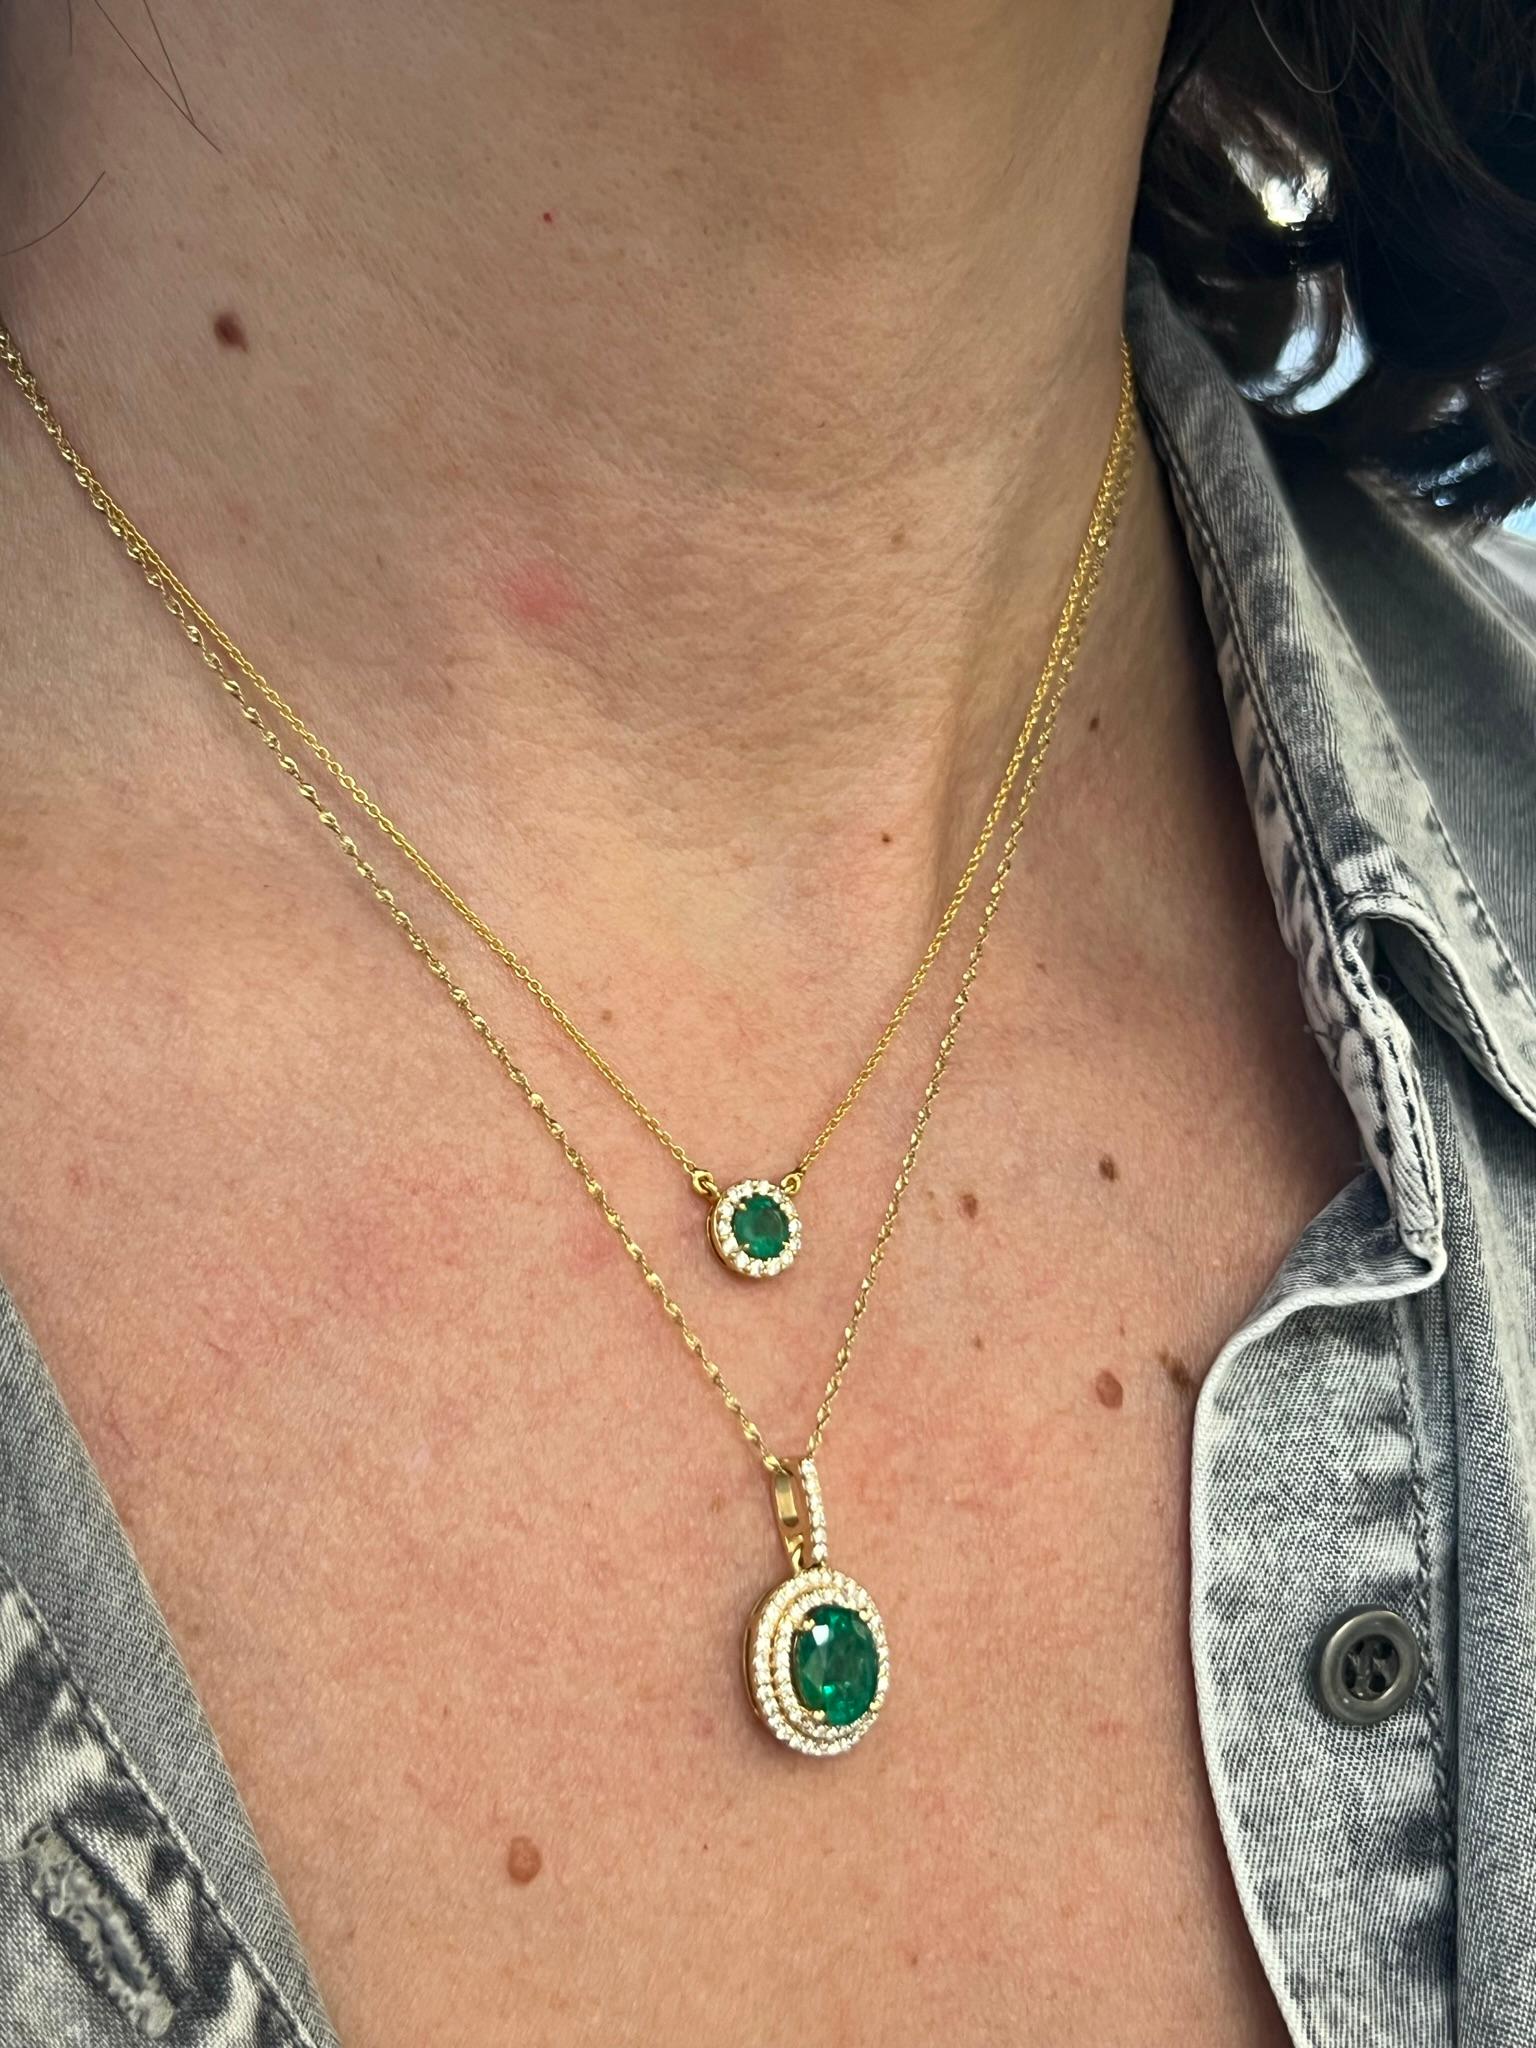 18K yellow gold emerald and diamond pendant necklace

Features

18k yellow gold
.45 carat total weight emerald, measures 5mm
.16 carat total weight body
The pendant measure approximately 8mm around
Chain is 18